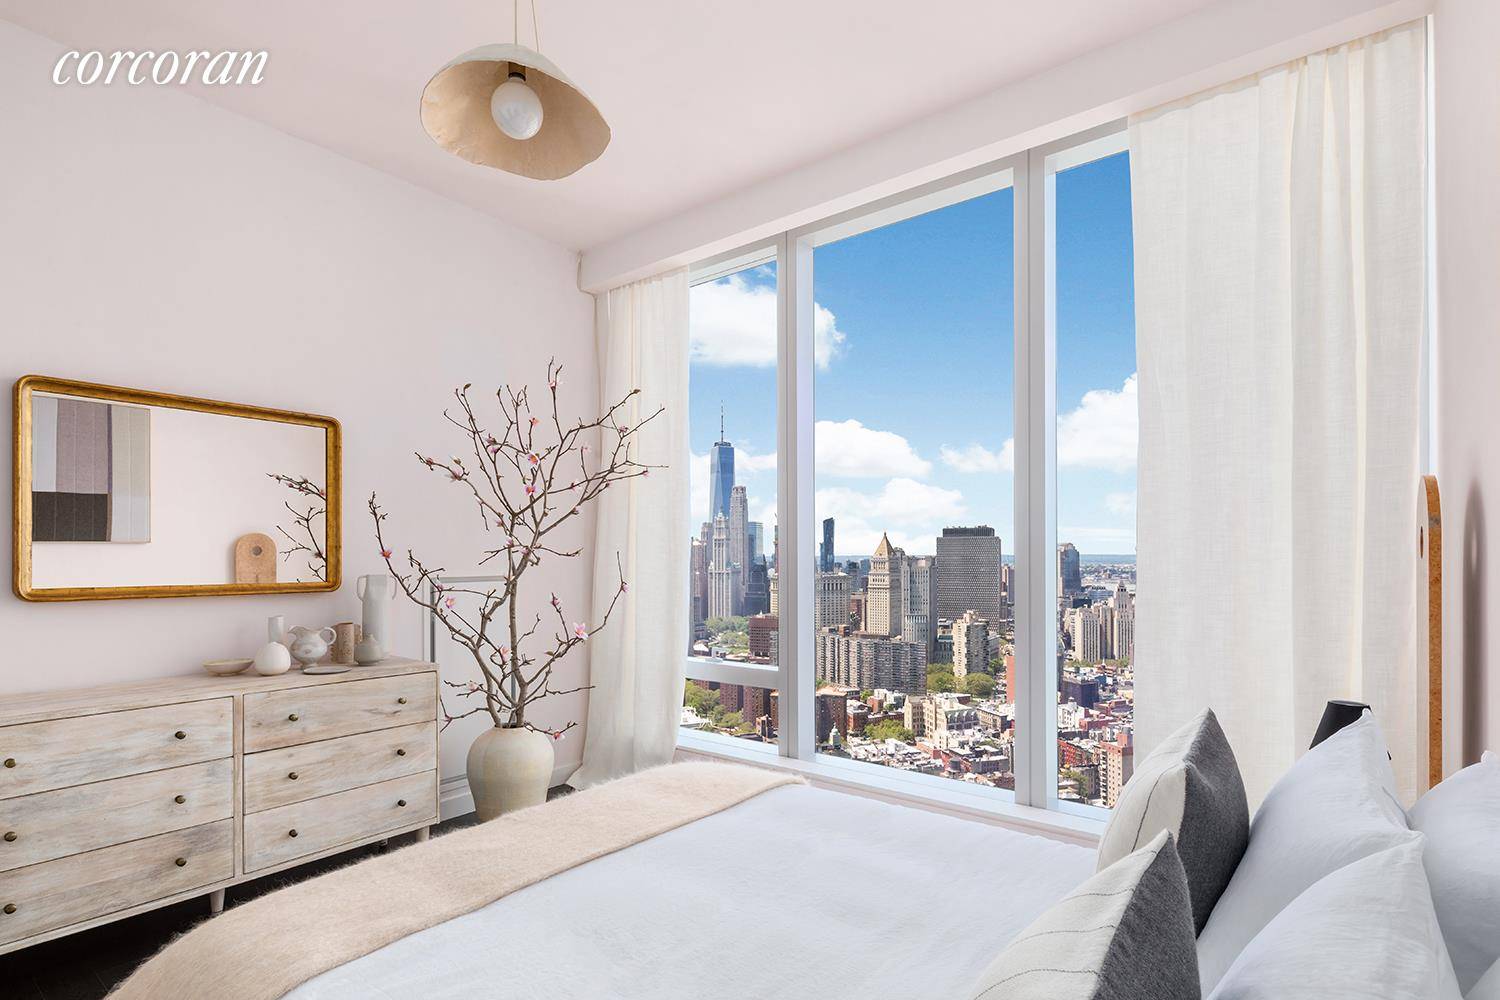 ONE MANHATTAN SQUARE OFFERS ONE OF THE LAST 20 YEAR TAX ABATEMENTS AVAILABLE IN NEW YORK CITY Residence 62A is a 1, 667 square foot three bedroom, three bathroom with ...